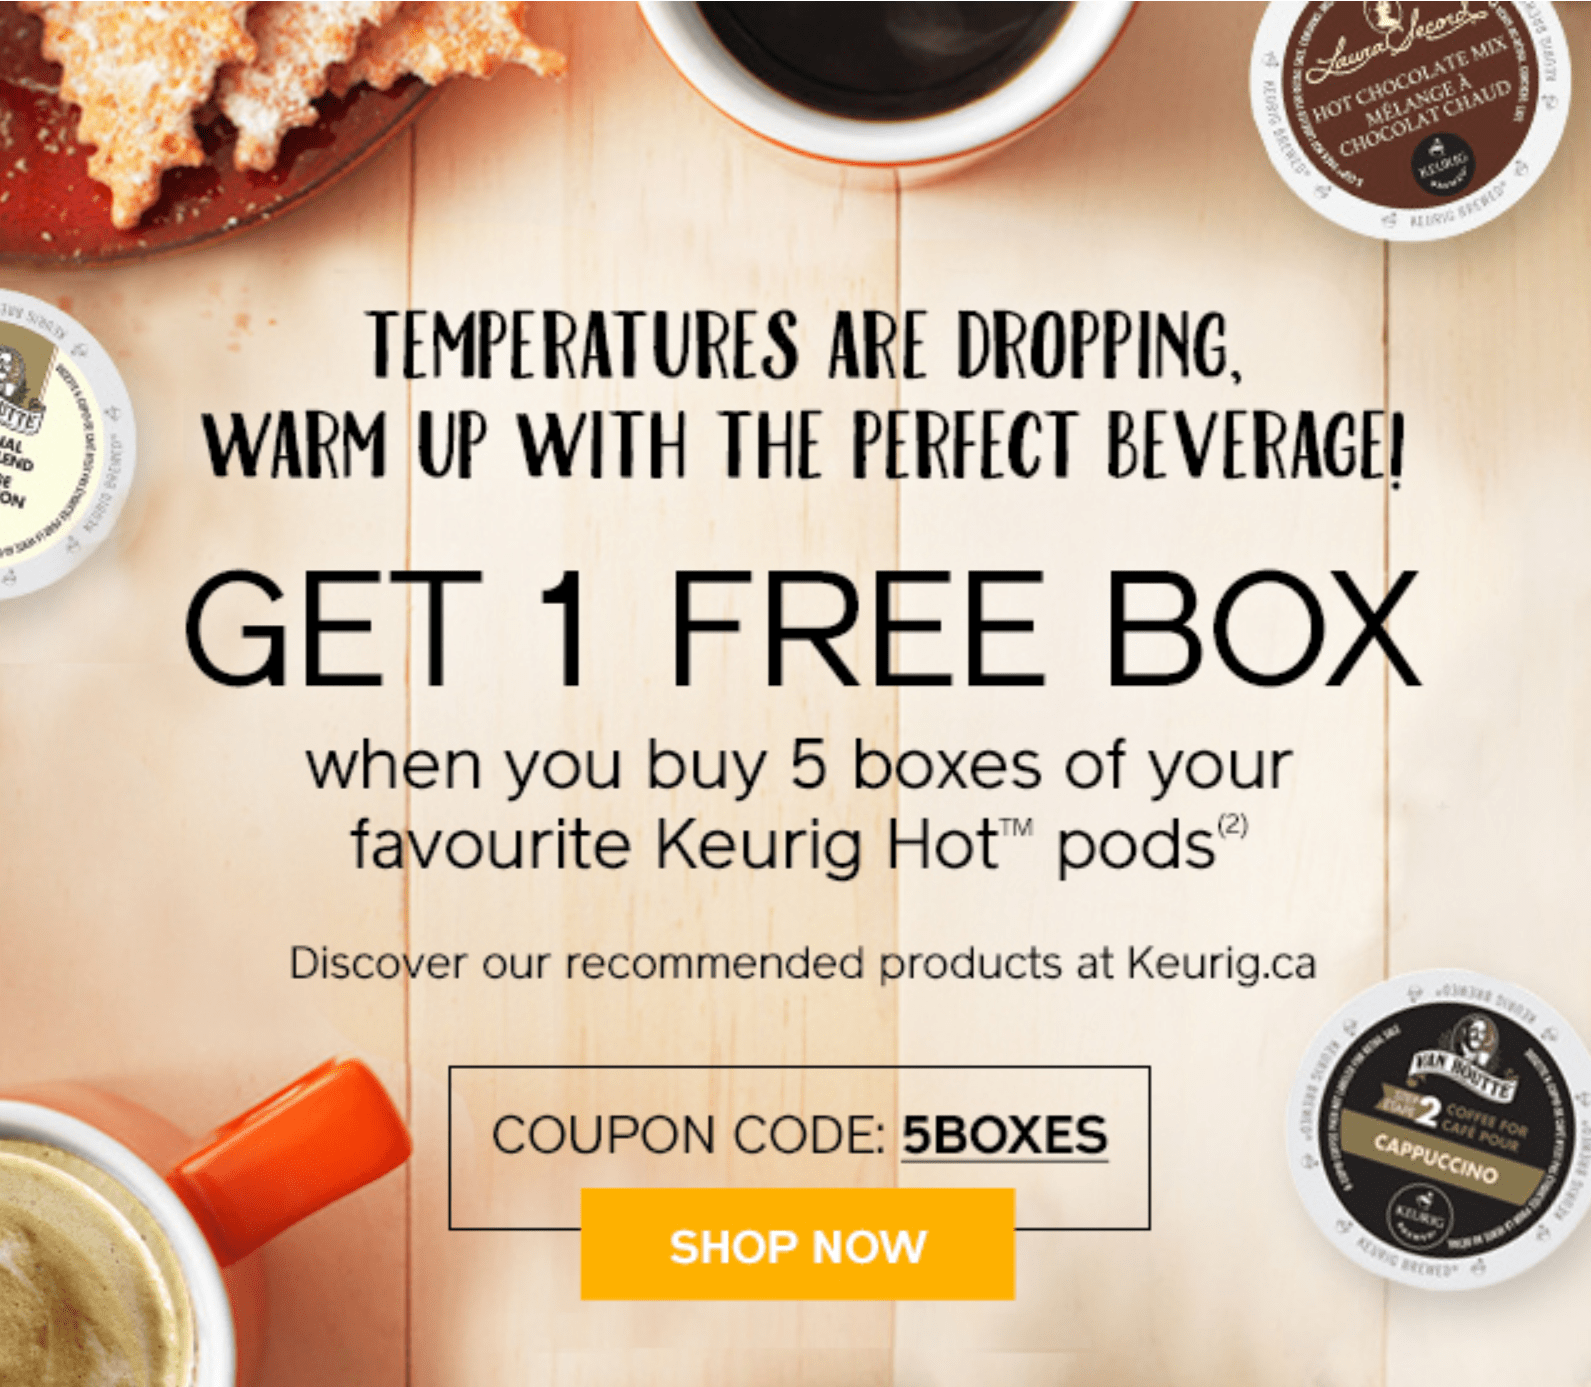 Keurig Canada Coupon Code Deal FREE KCup Box When You Buy 5 Boxes of